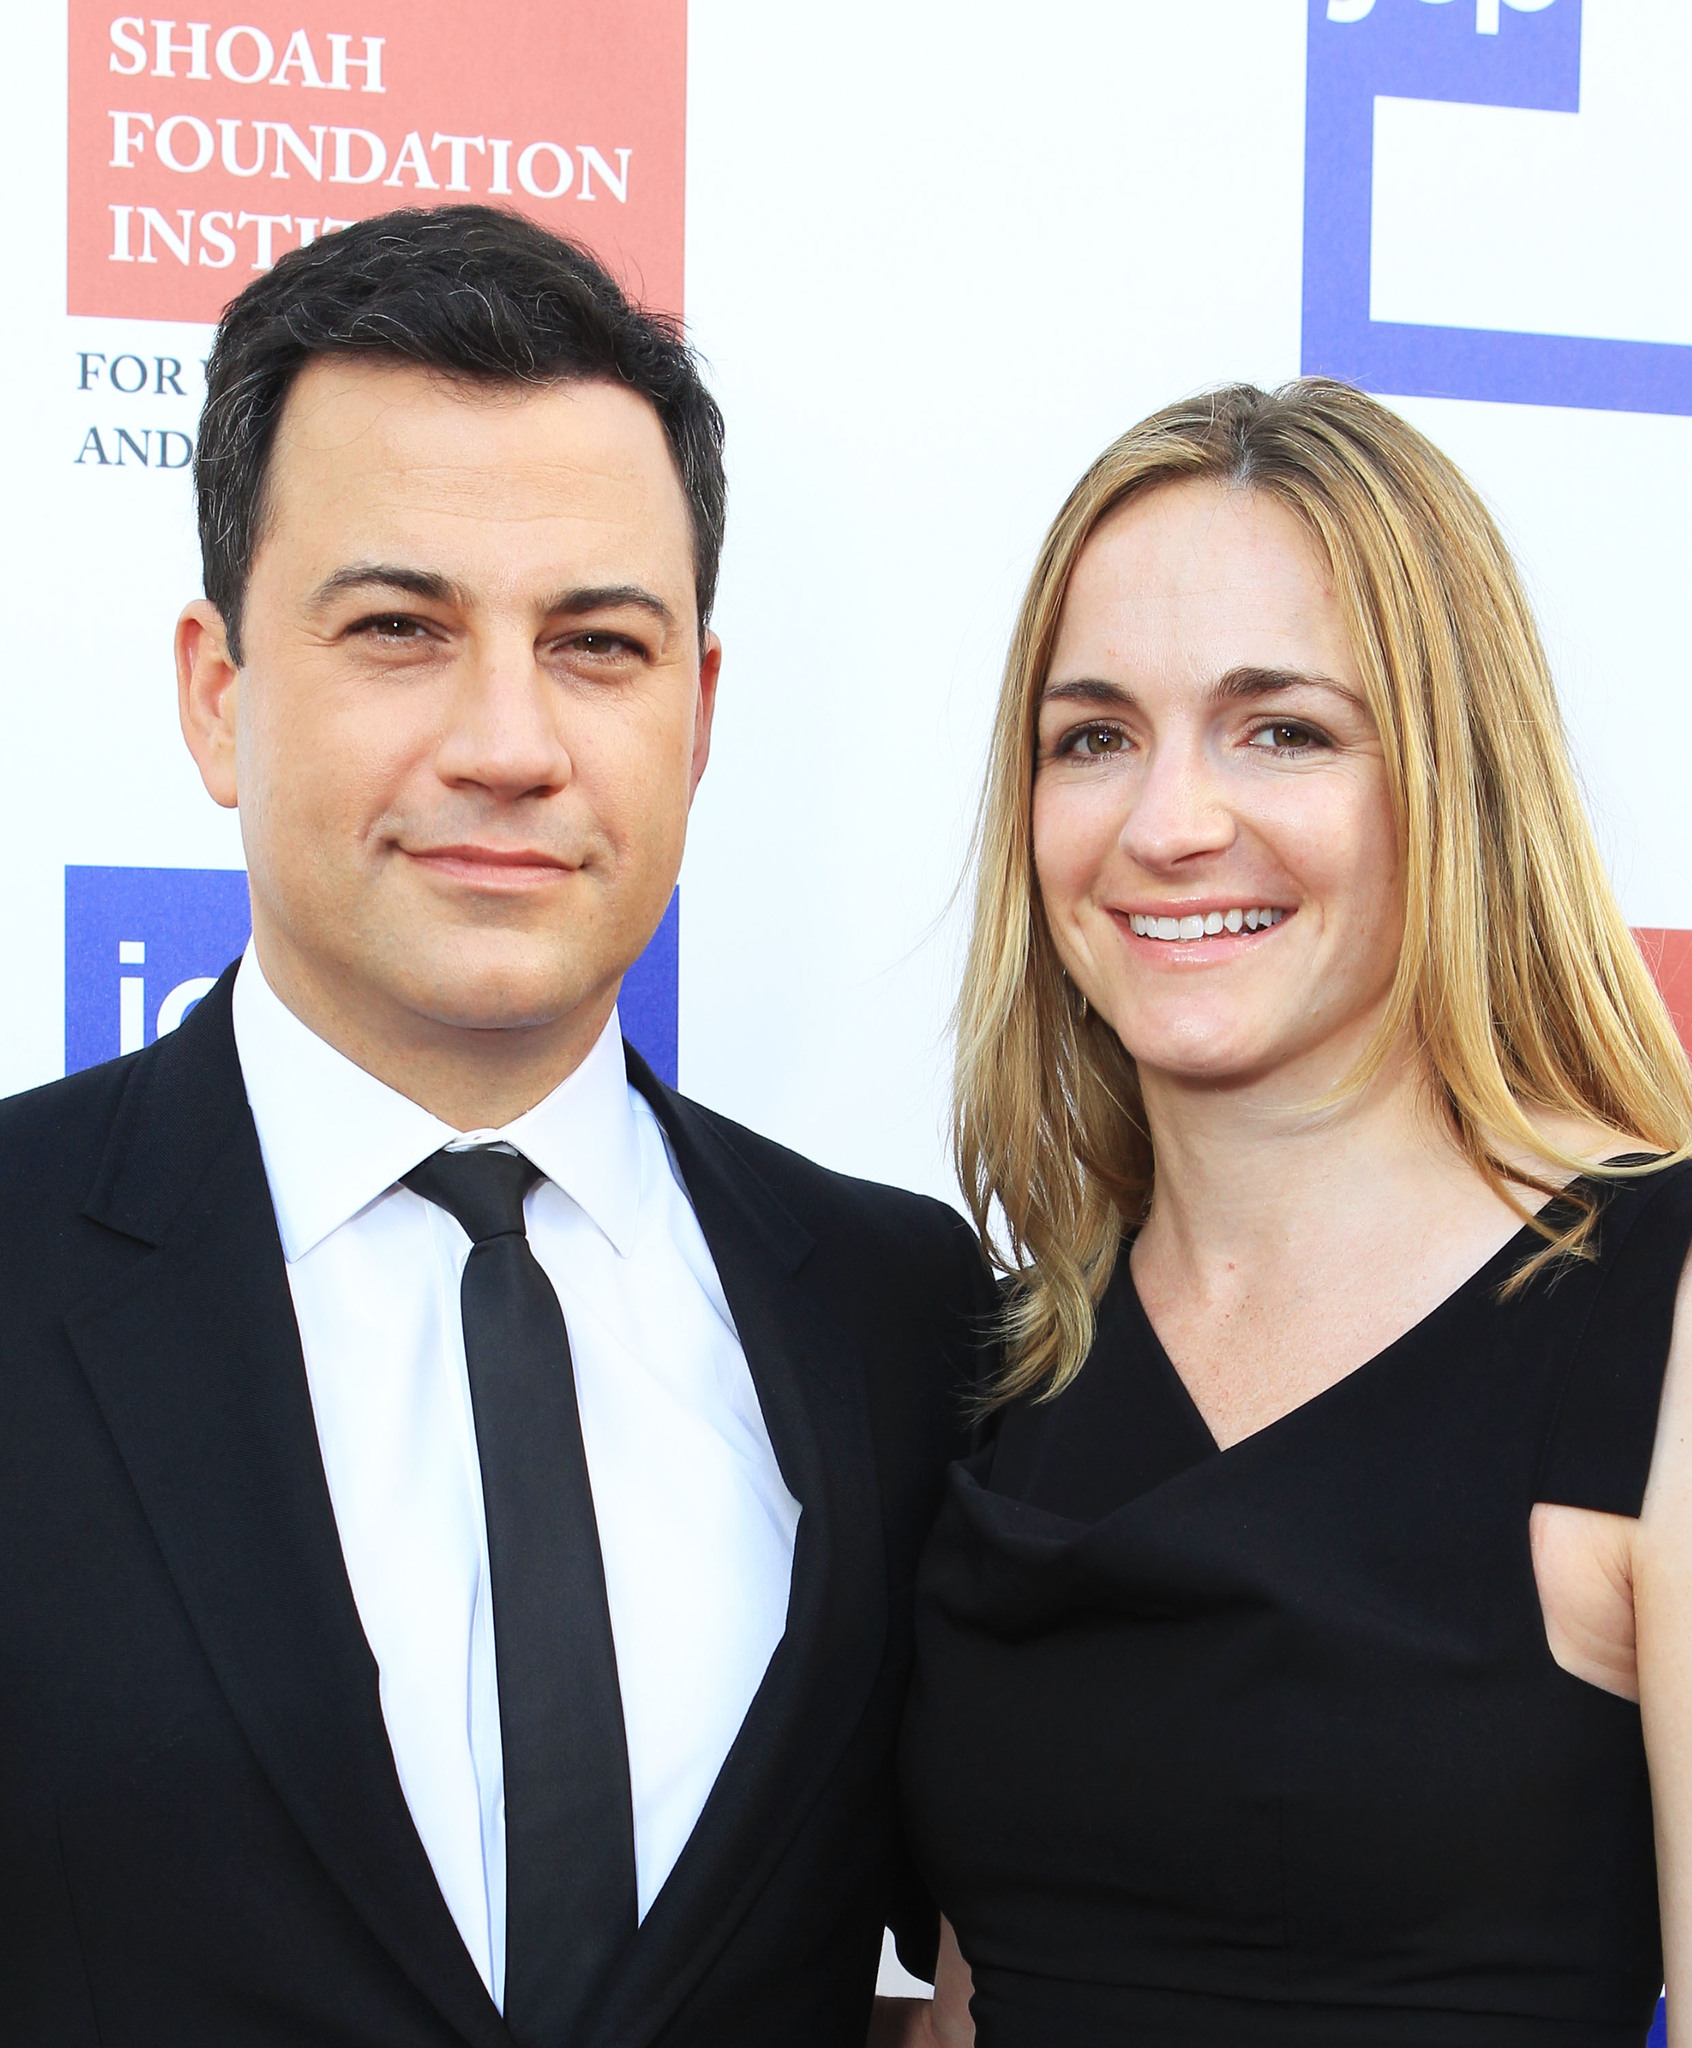 Jimmy Kimmel and Molly McNearney